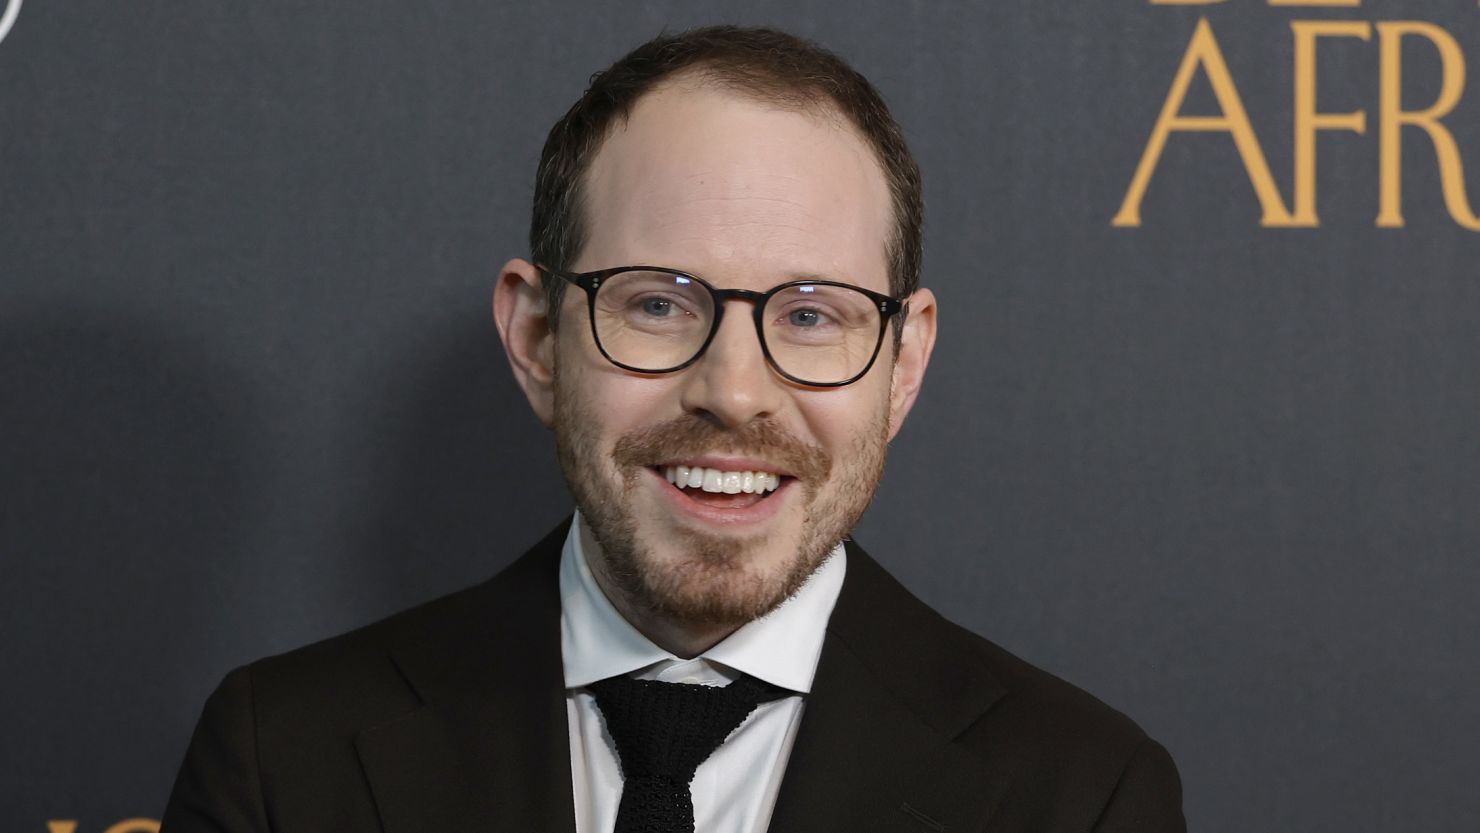 Writer-director Ari Aster attends the Los Angeles premiere of A24's "Beau Is Afraid" at the Directors Guild of America on April 10, 2023 in Los Angeles, California.